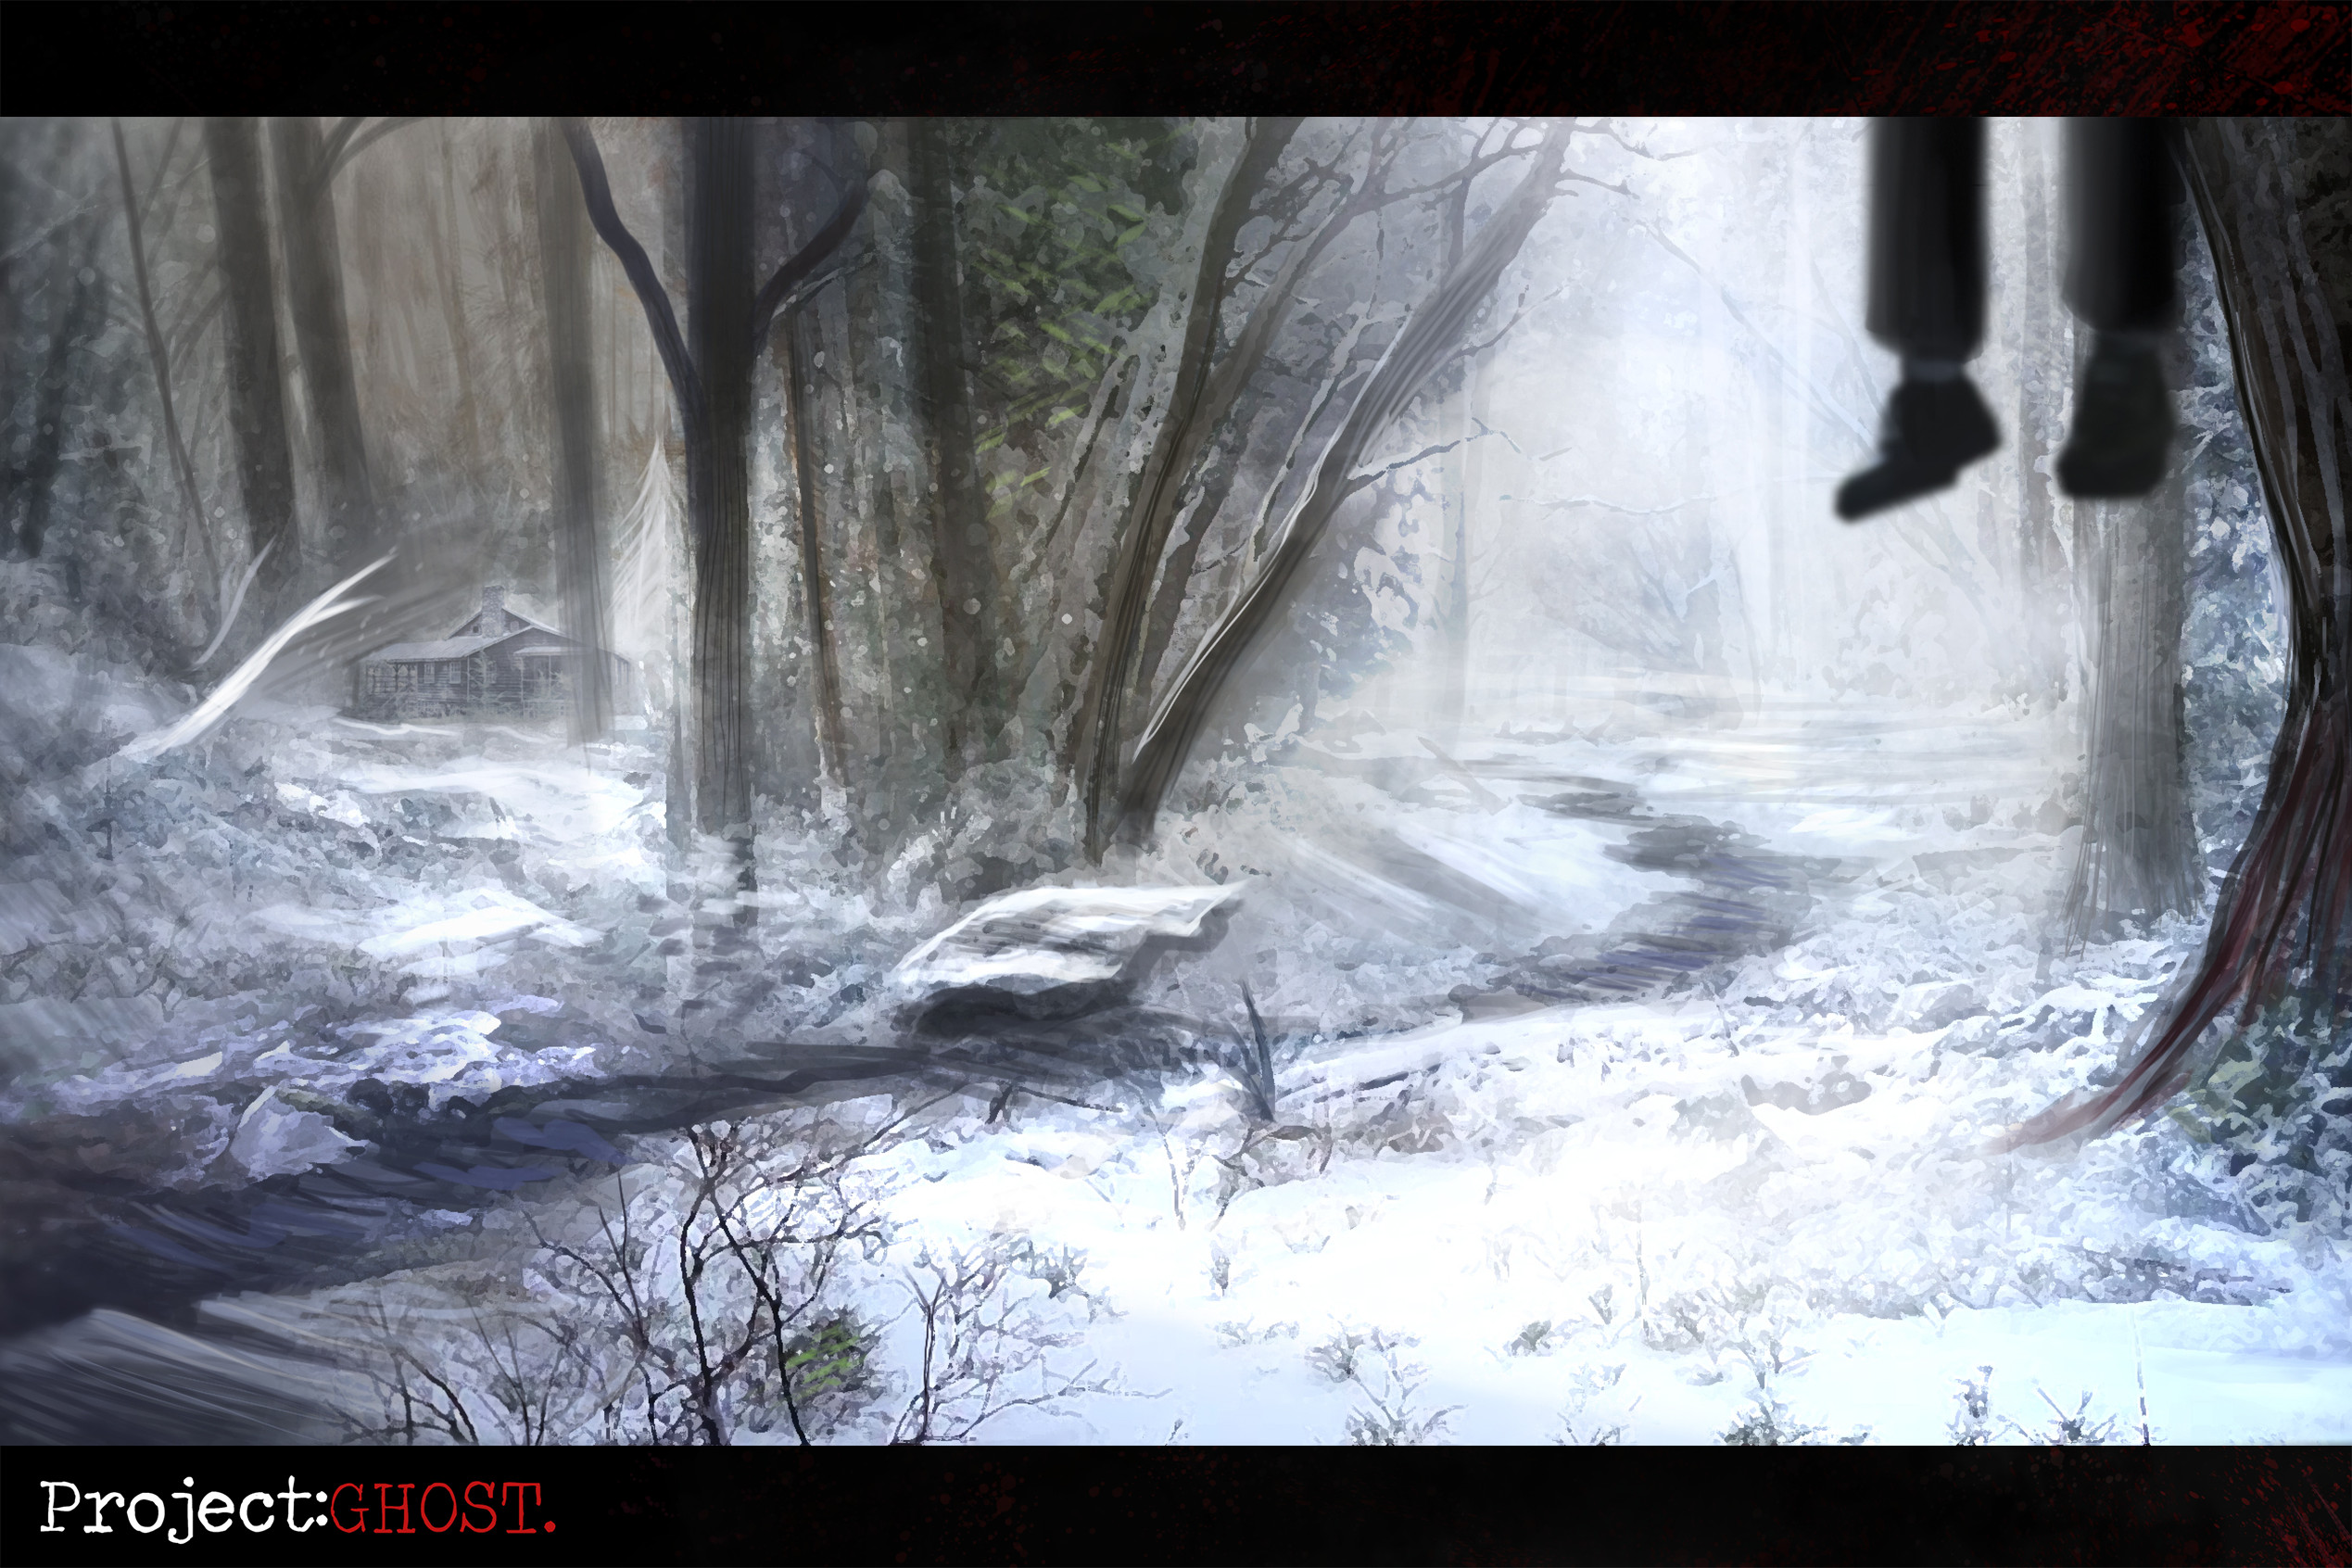 Thumbnail 2: The silent dead of winter in the cursed forest, hiding a cabin across the creek.